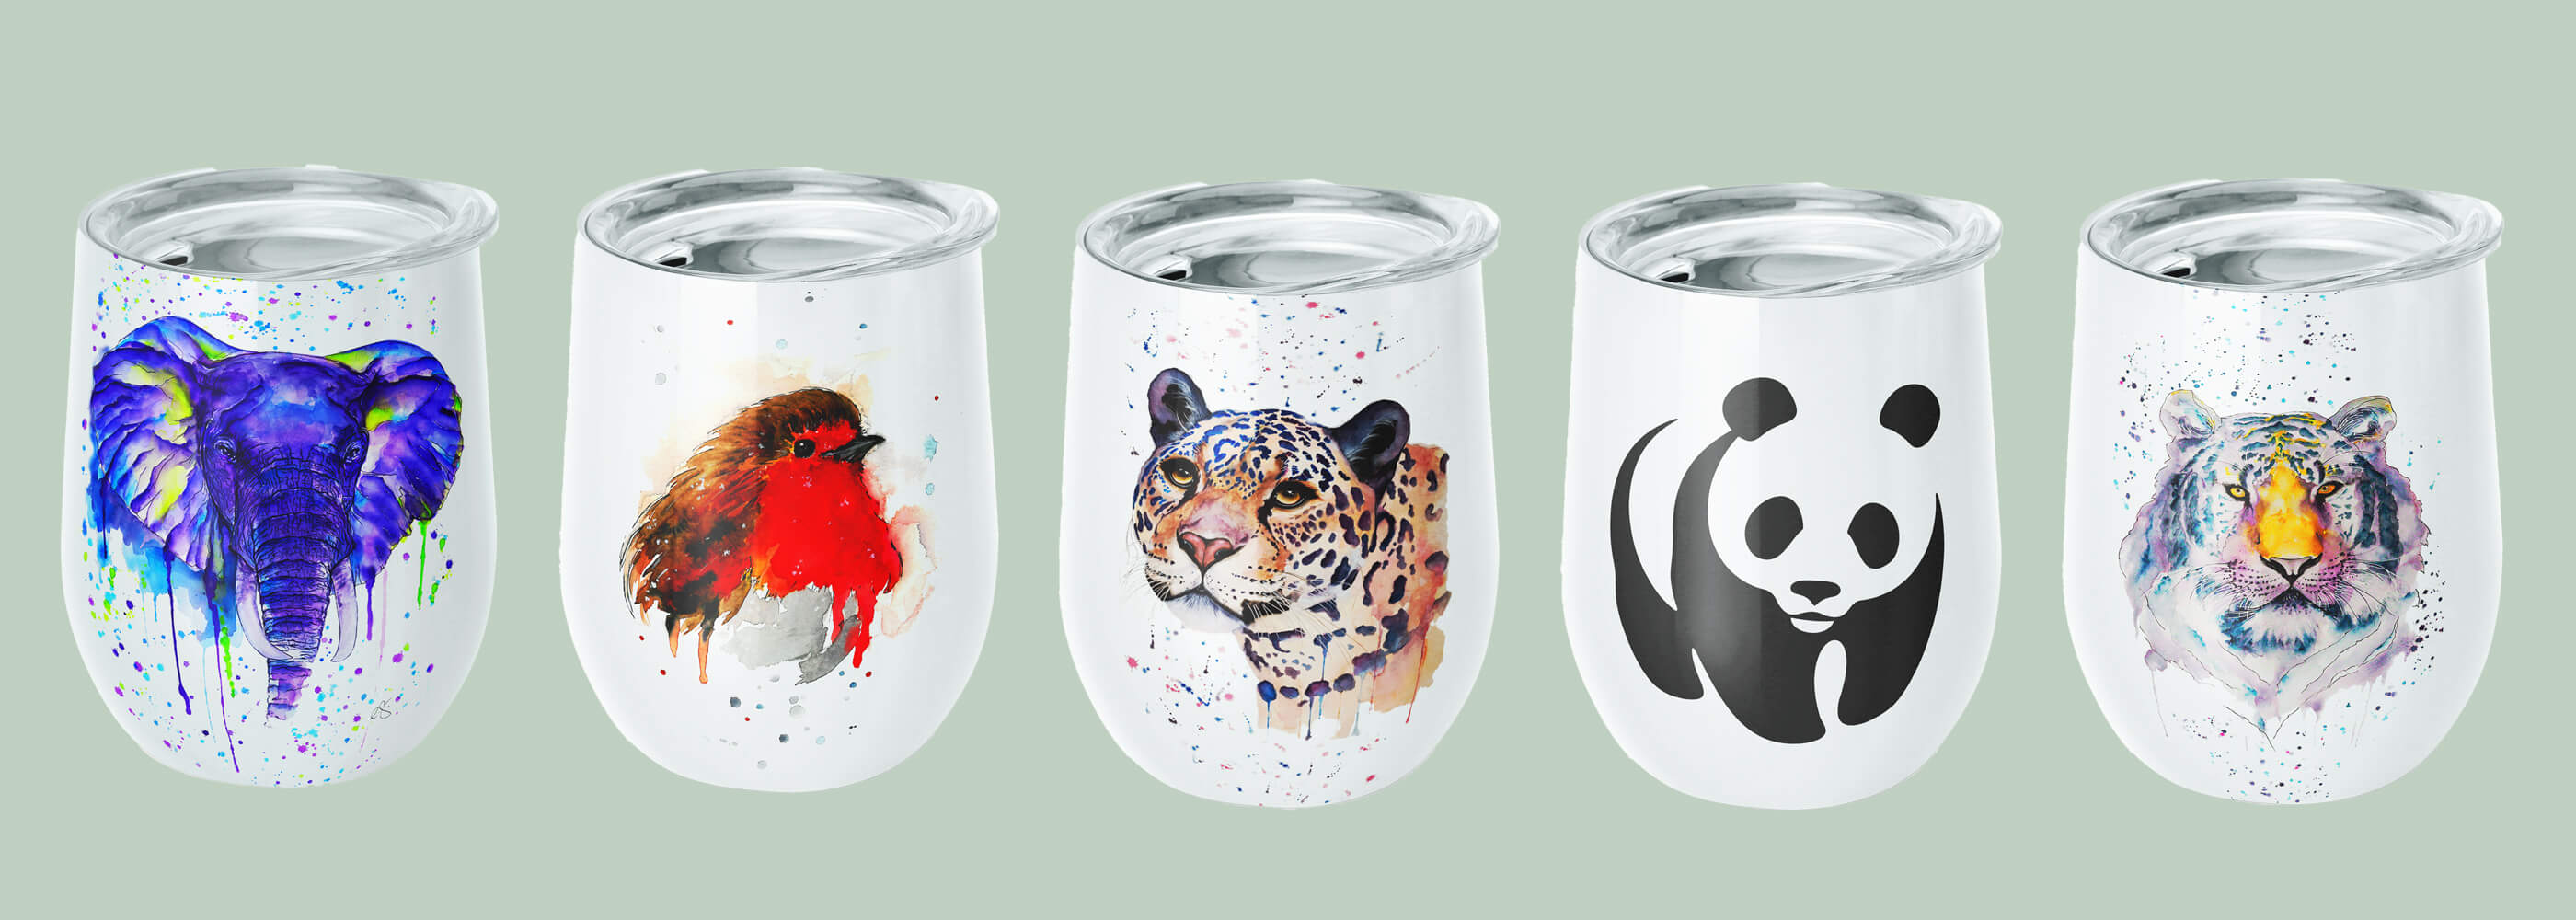 WWF Tumbler collection